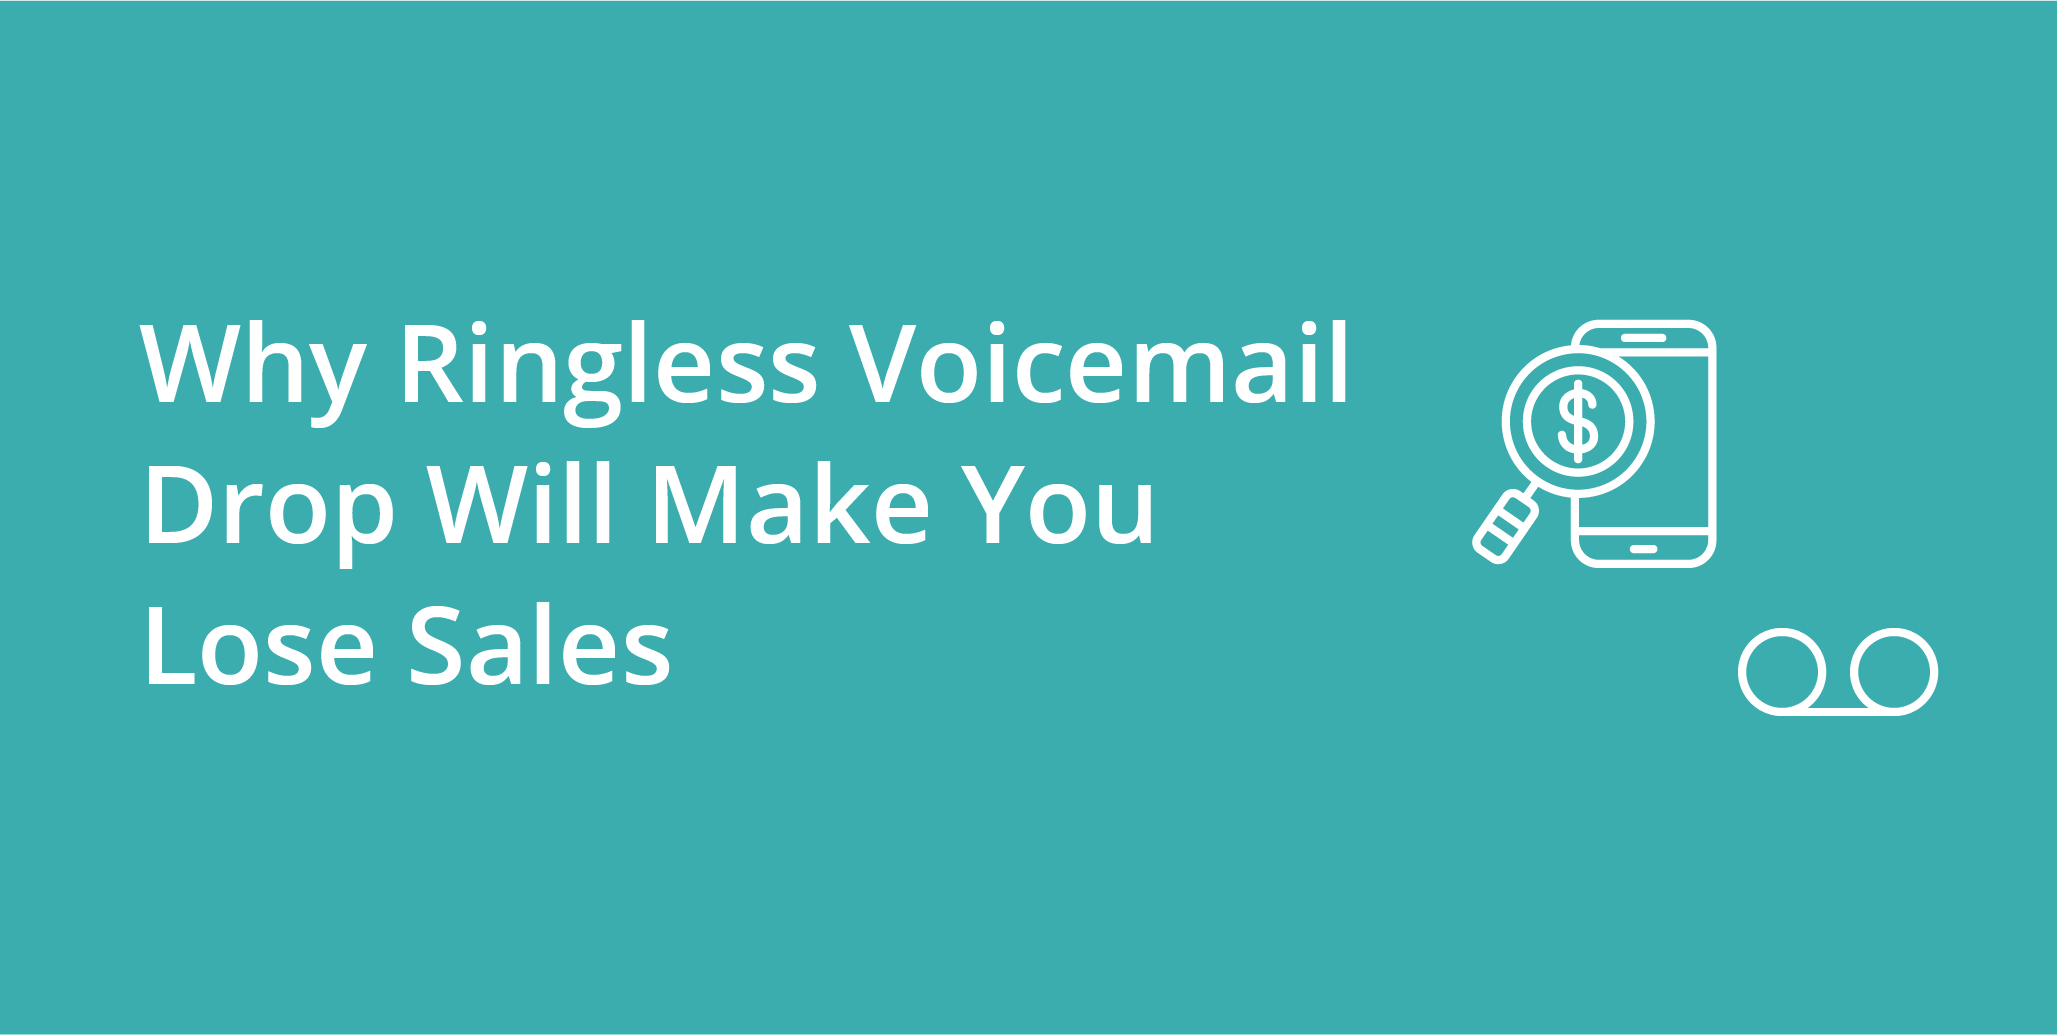 Why Ringless Voicemail Drop Will Make You Lose Sales | Telephones for business